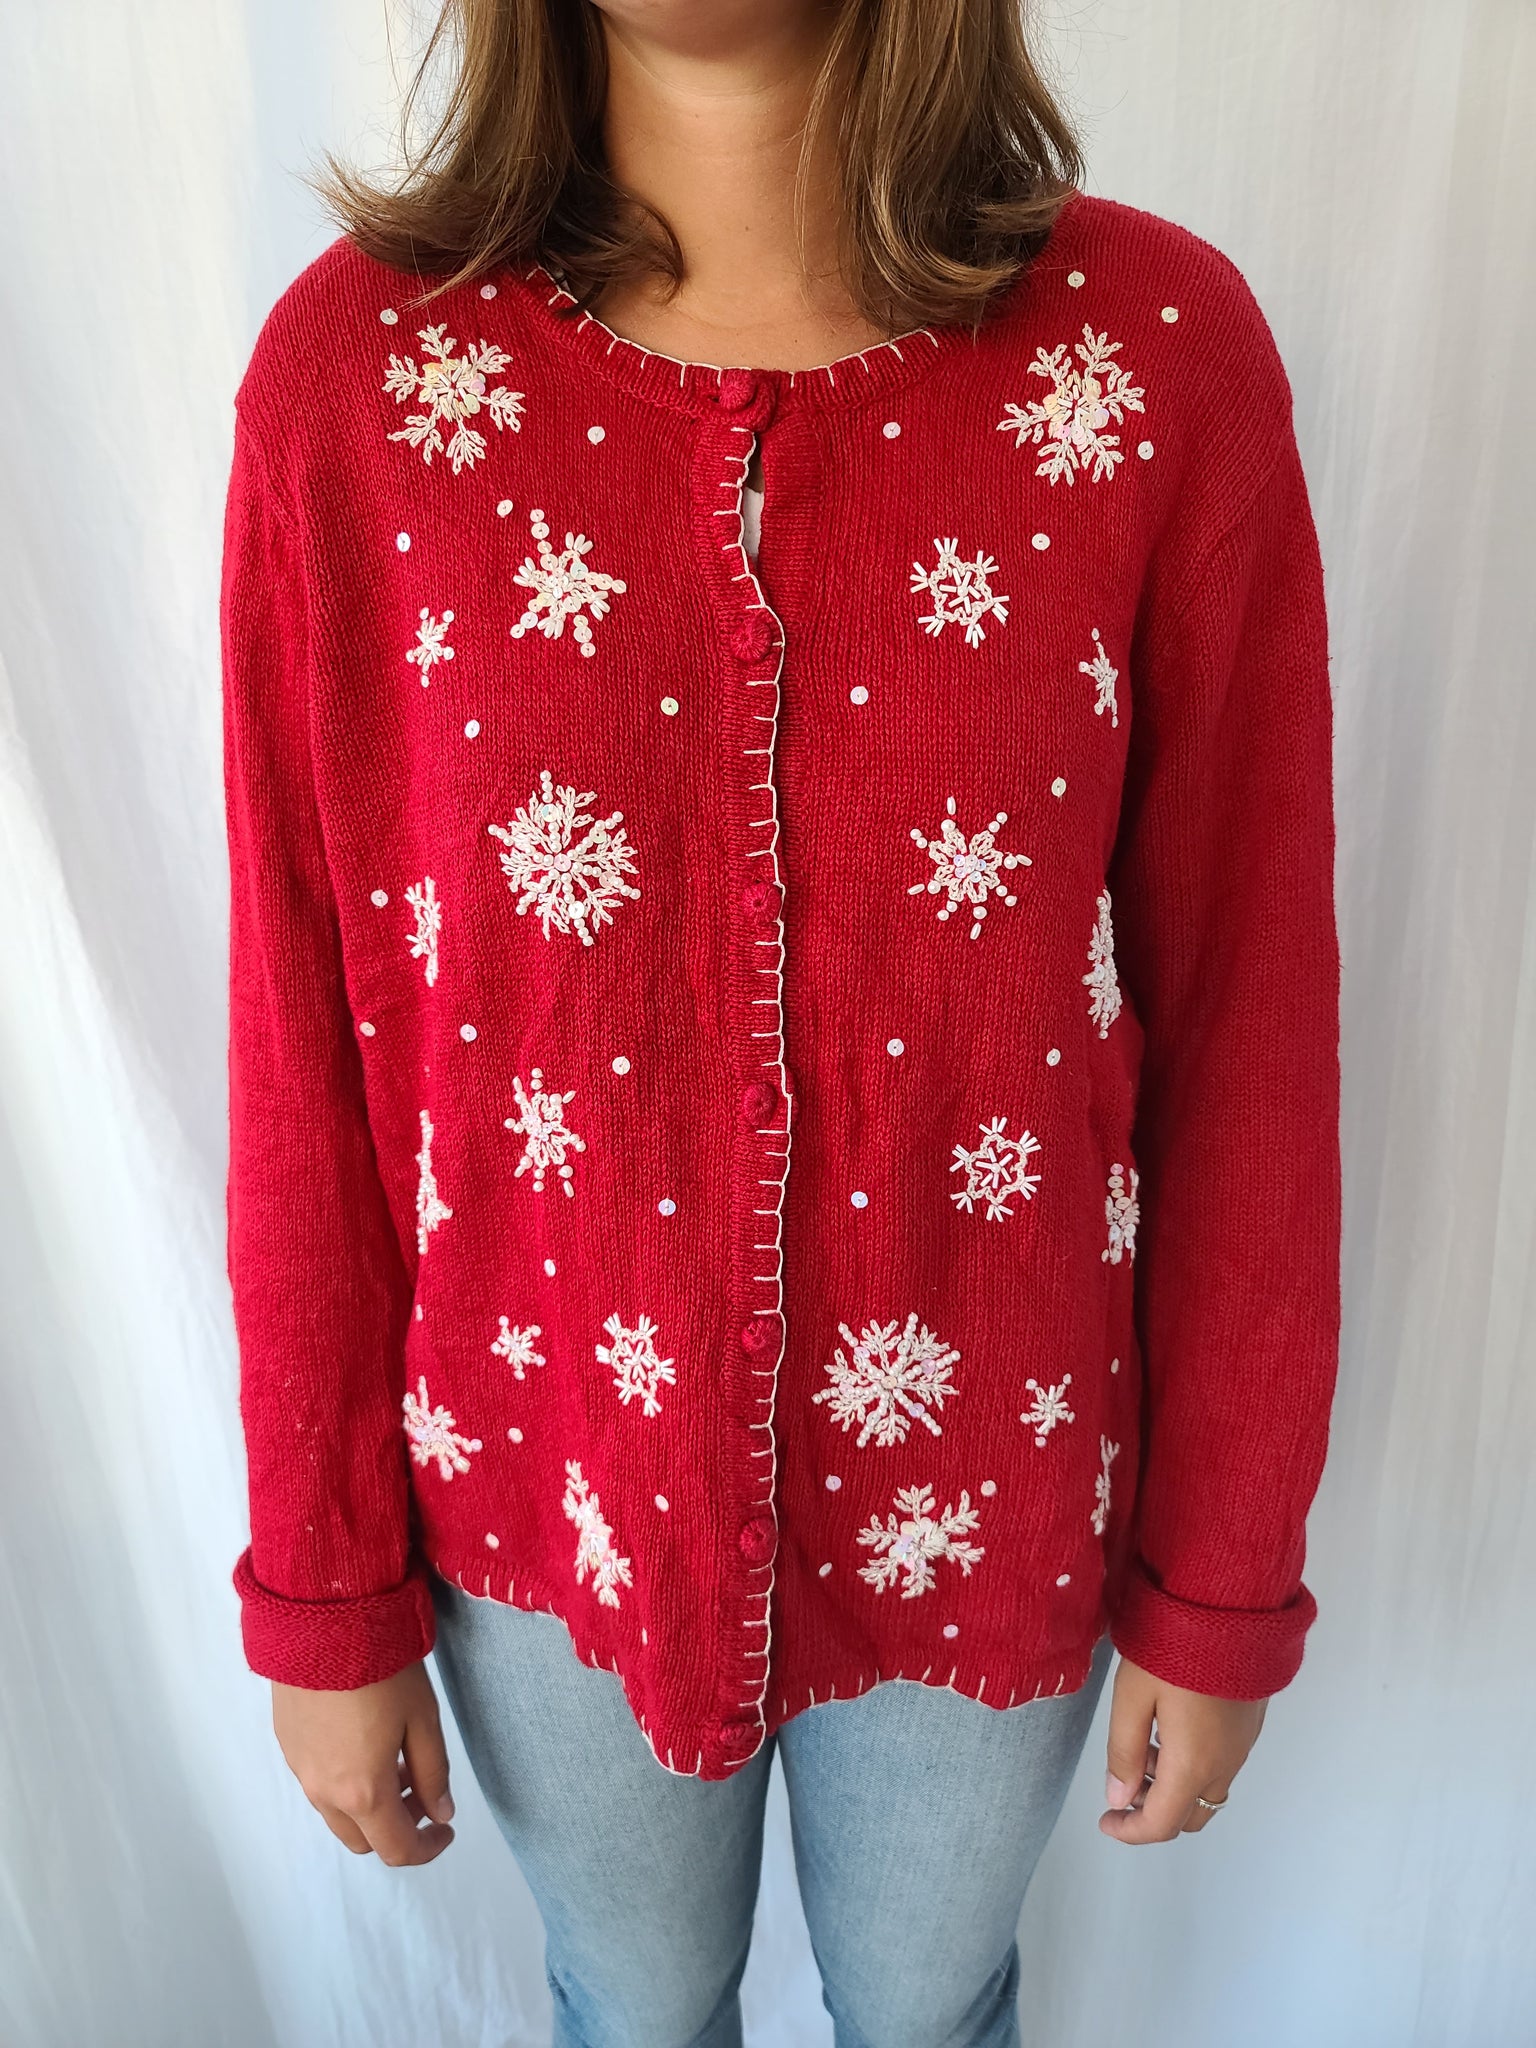 Snowflakes on Red Button up Sweater